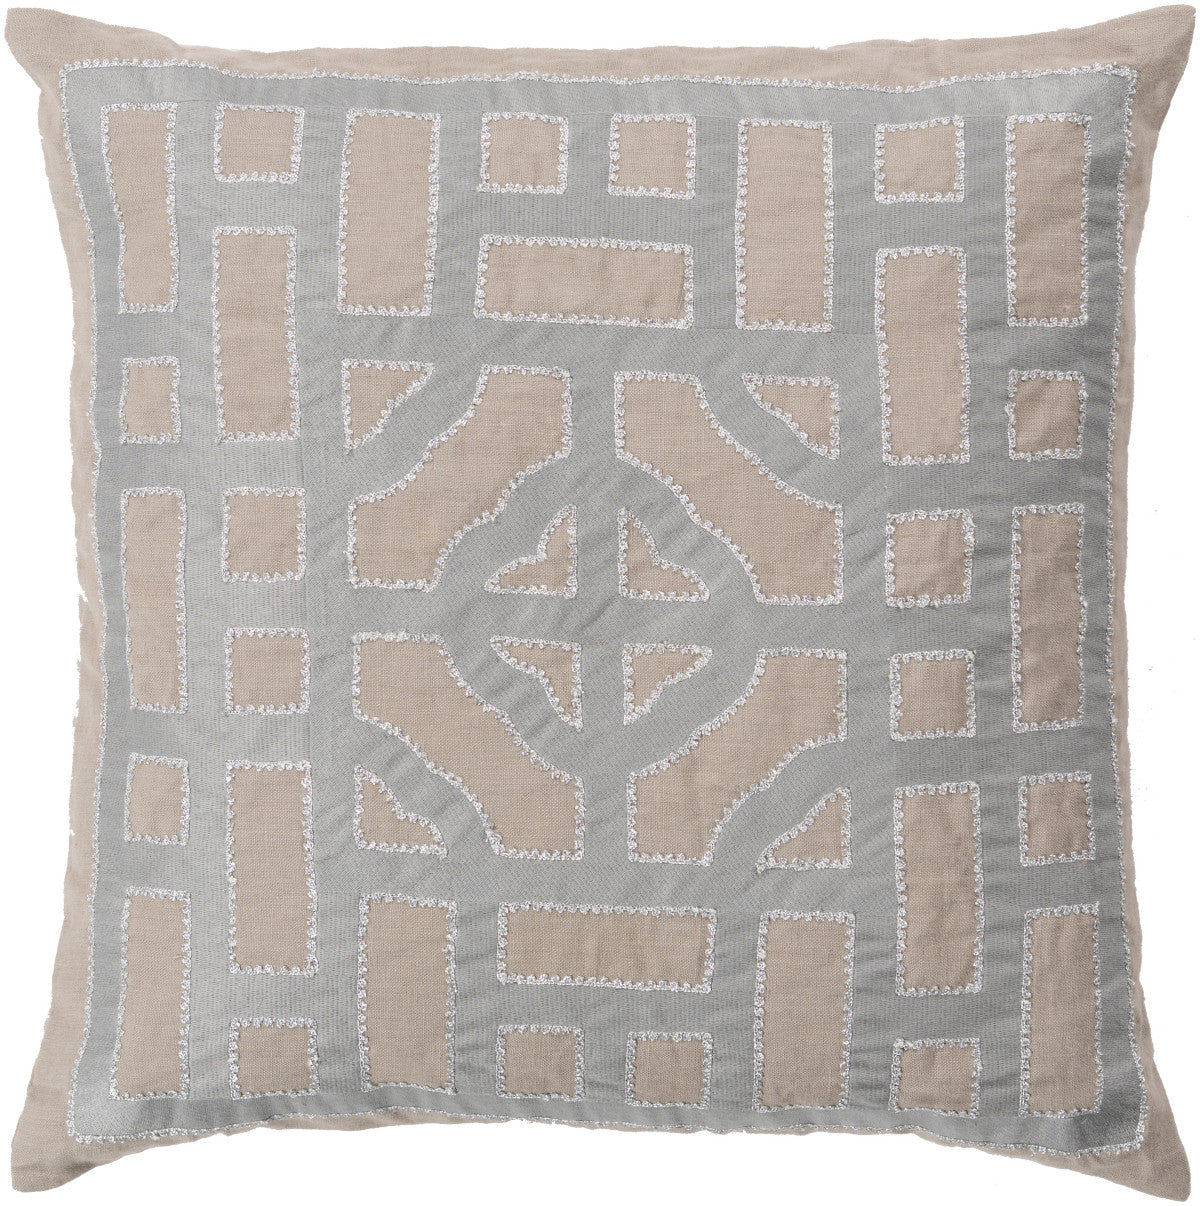 Surya Chinese Gate Looking Glass LD-050 Pillow by Beth Lacefield